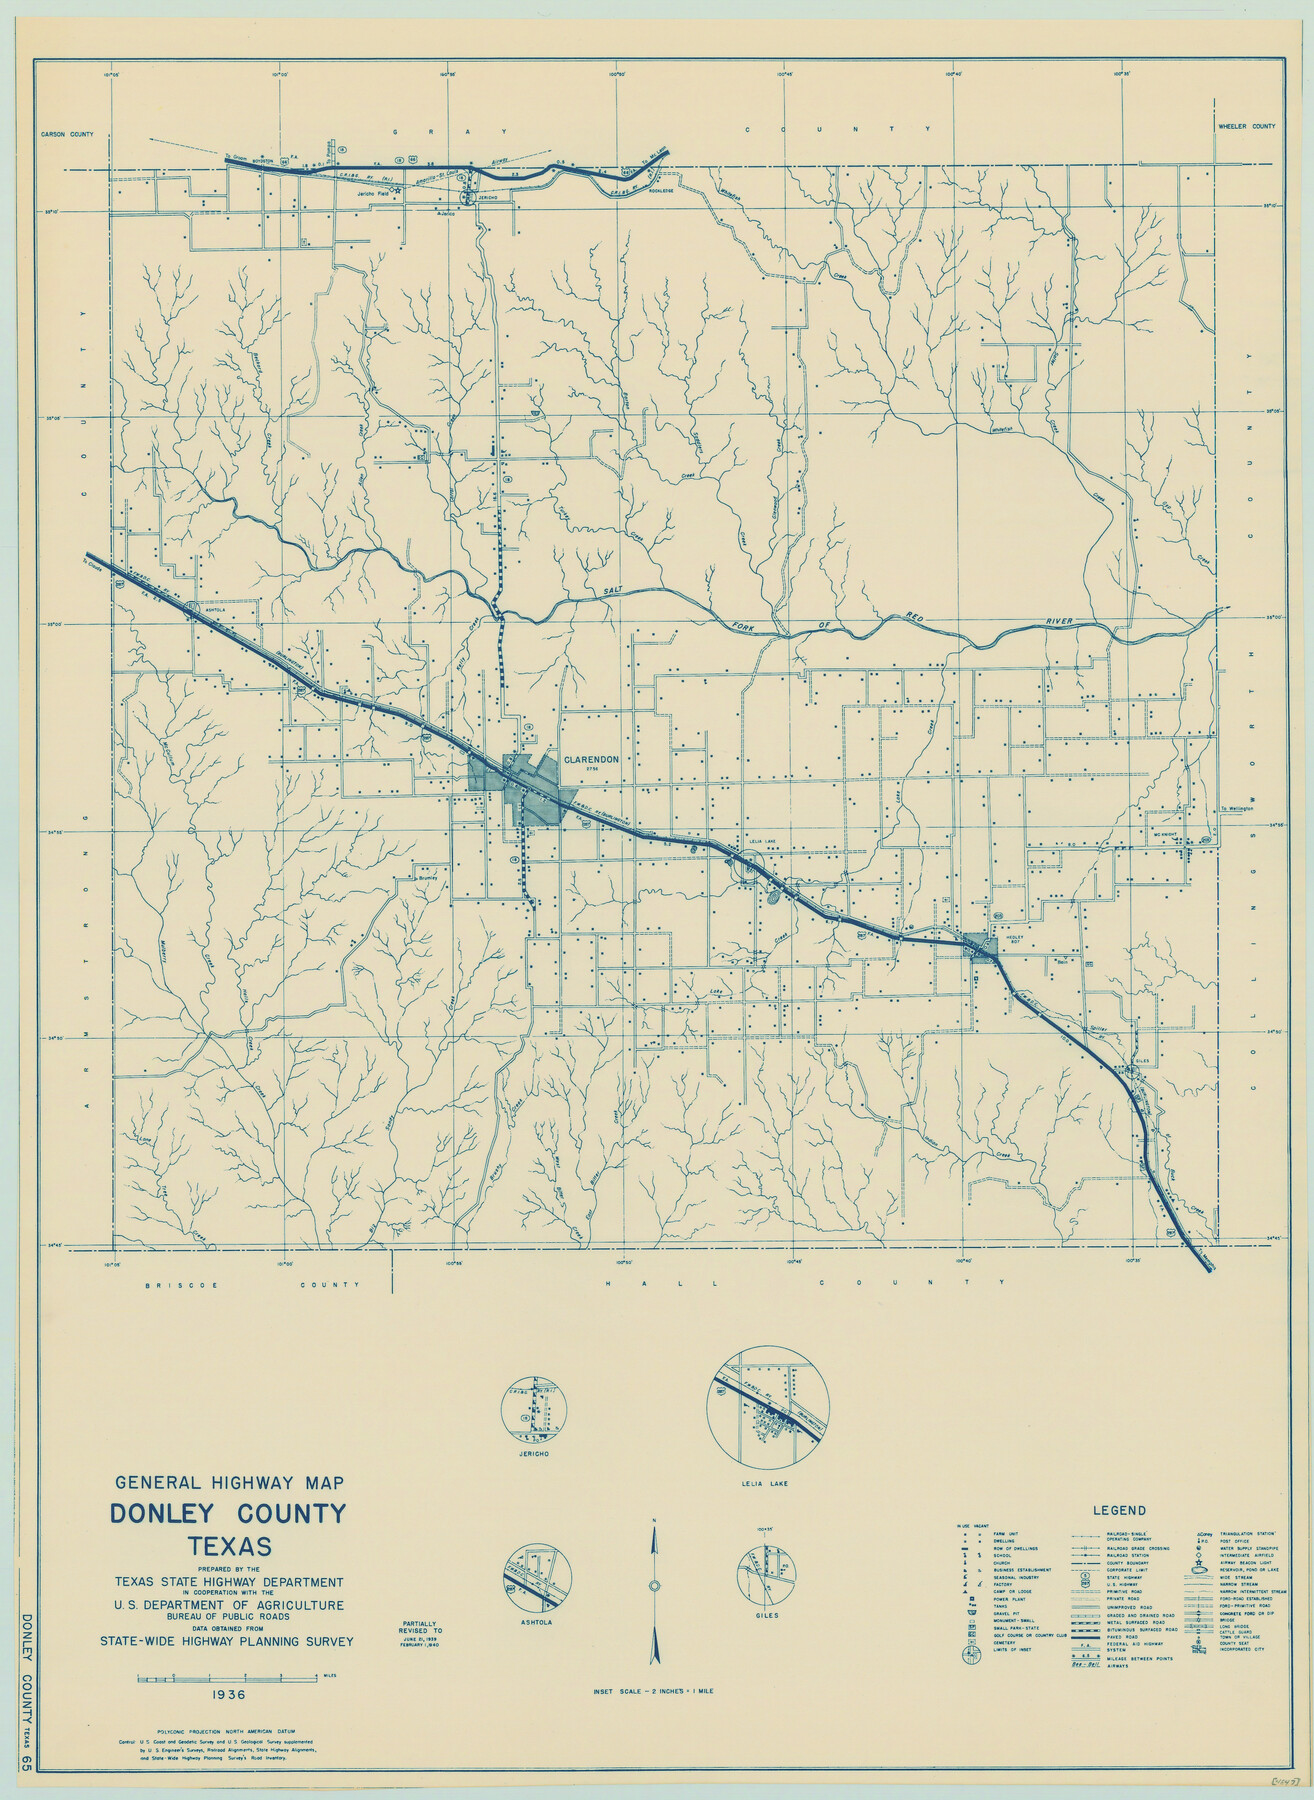 79078, General Highway Map, Donley County, Texas, Texas State Library and Archives